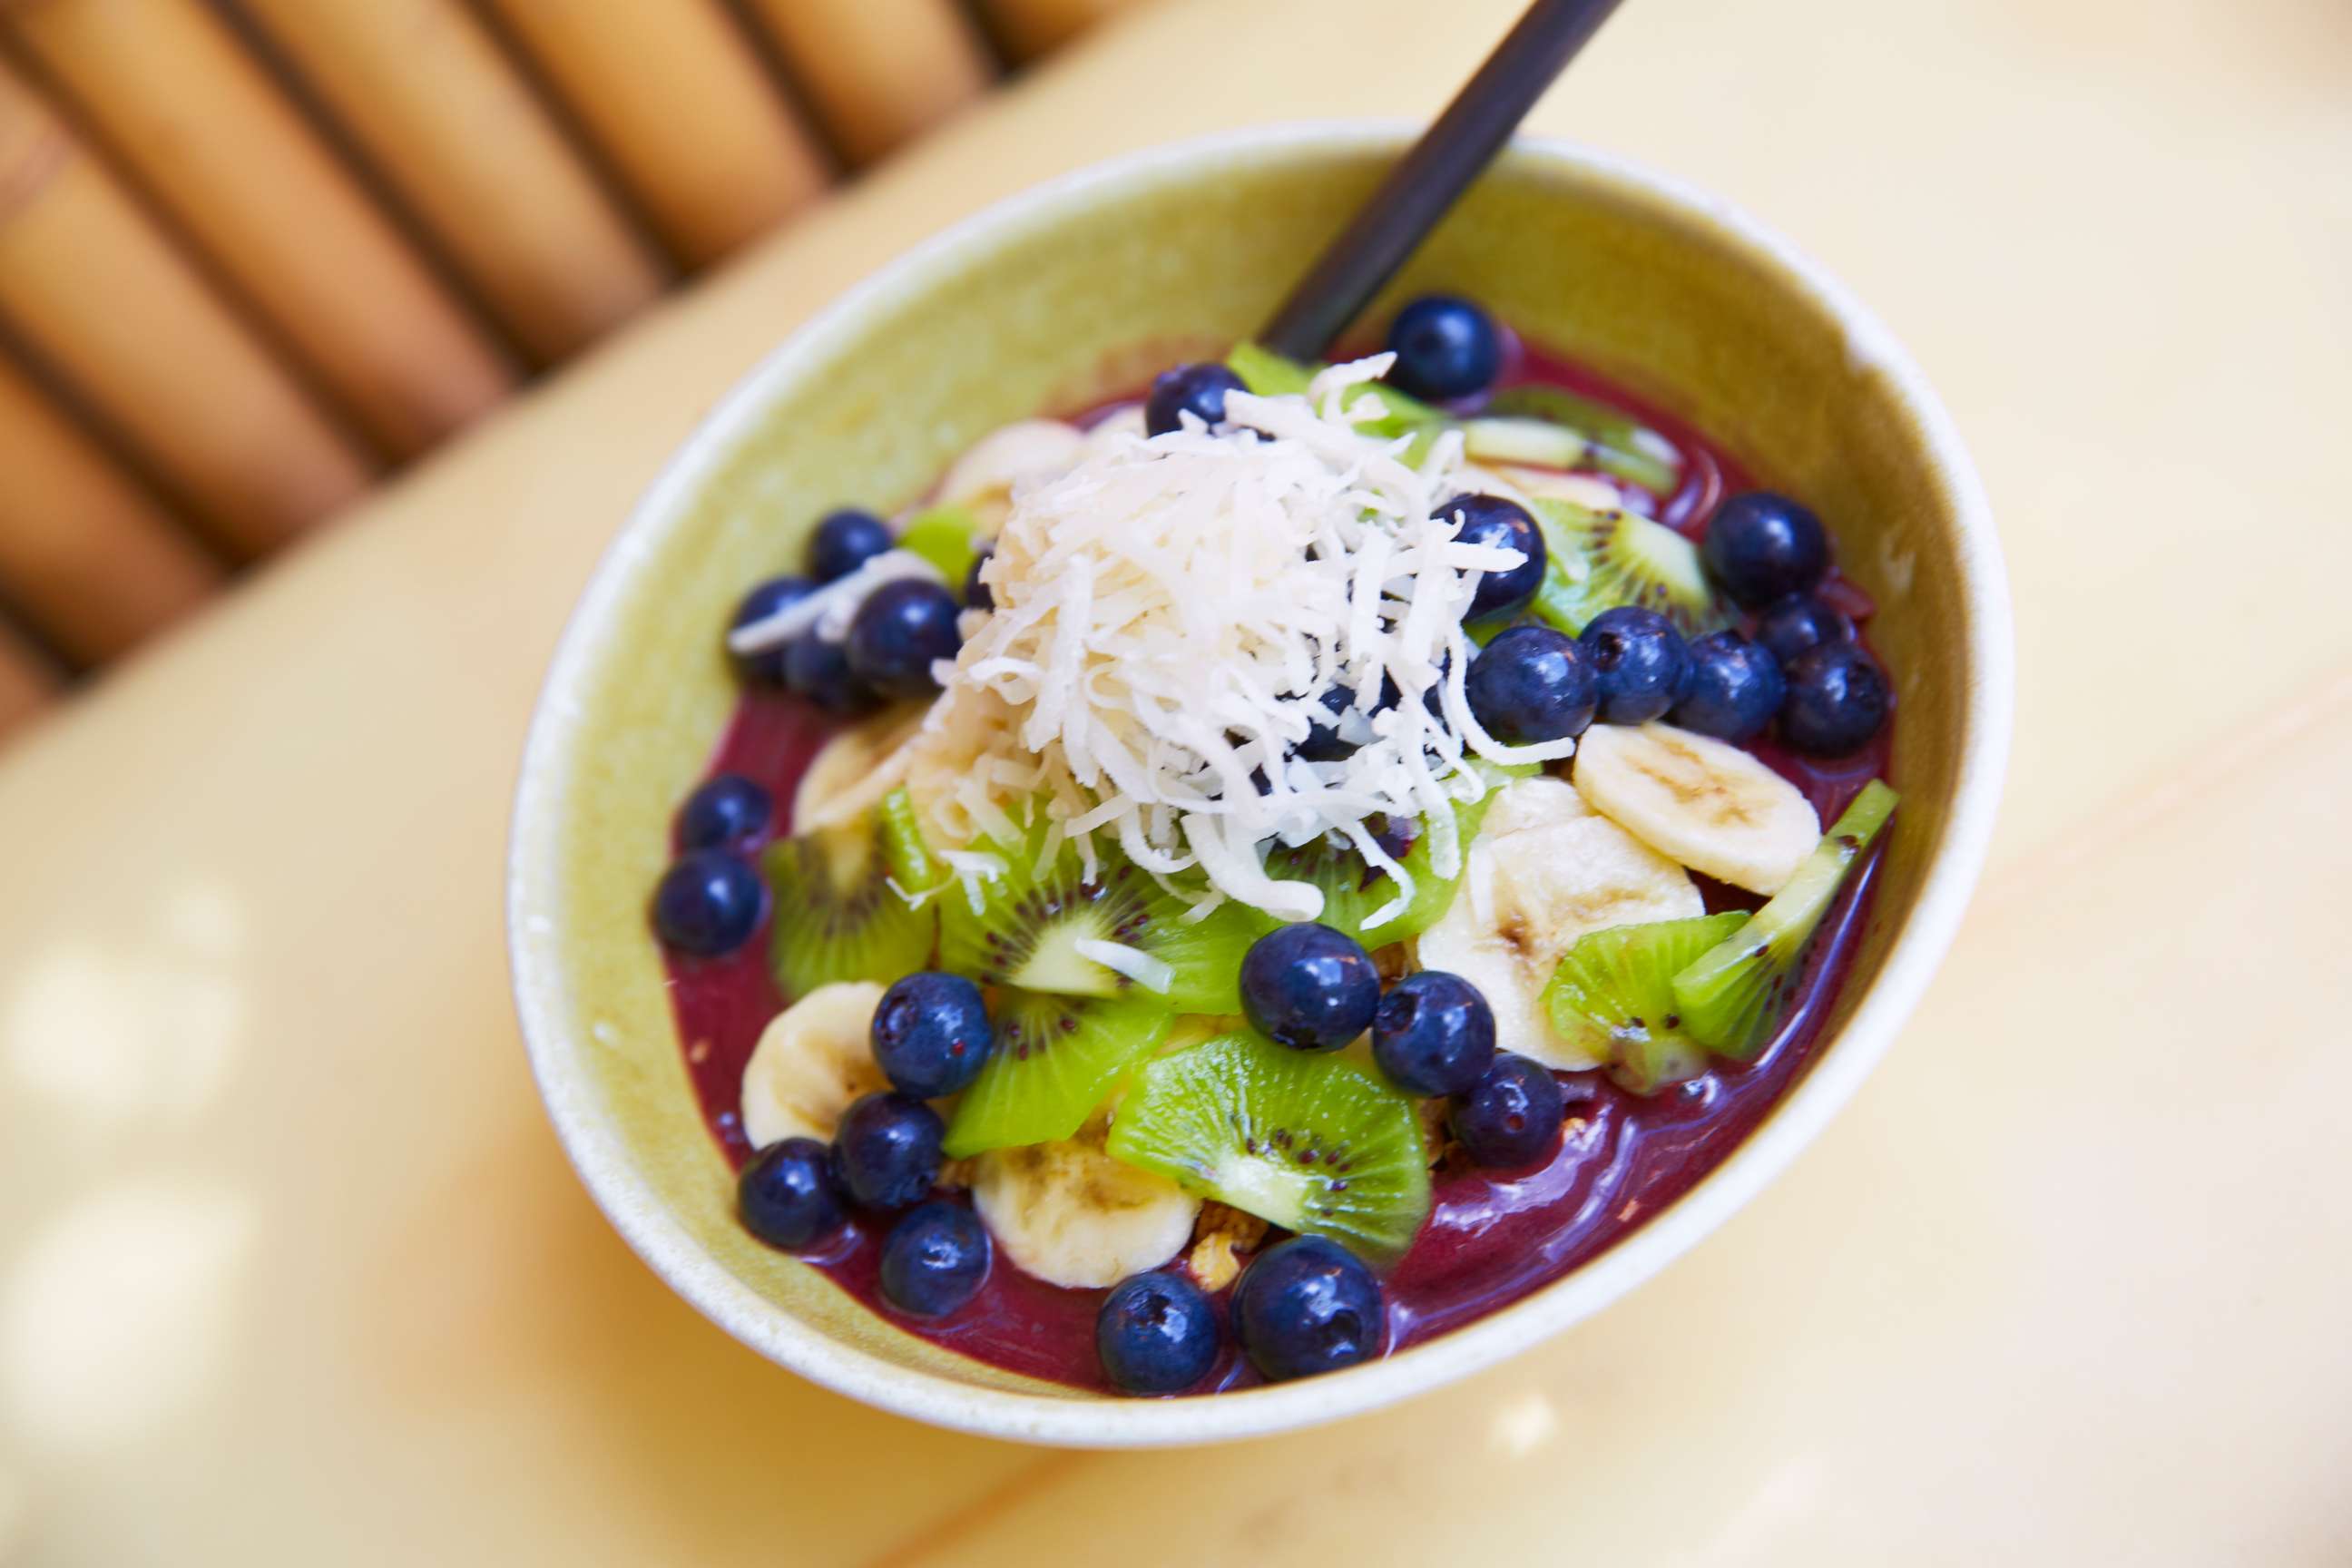 PHOTO: Acai fruit in a bowl with bananas and kiwi, in this undated photo.